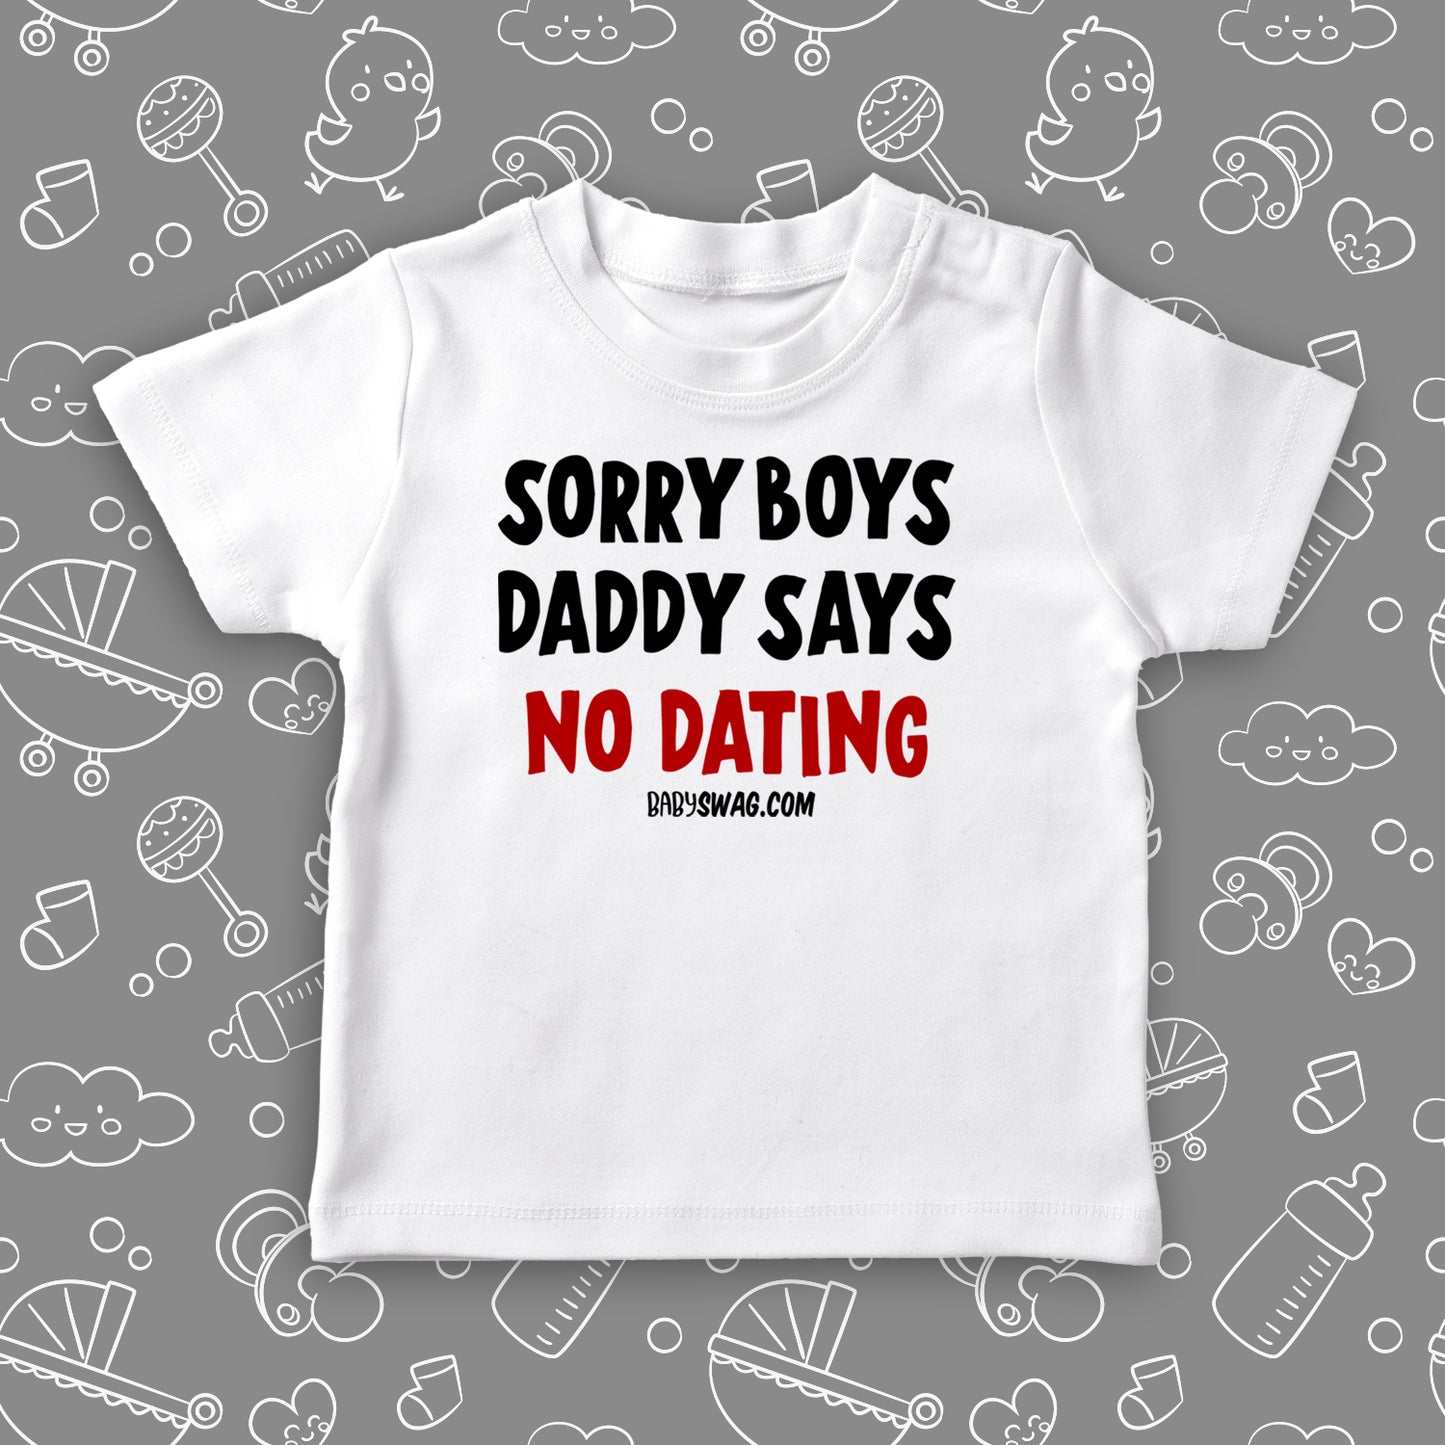 Toddler girl shirts with saying "Sorry Boys Daddy Says No Dating" in white.